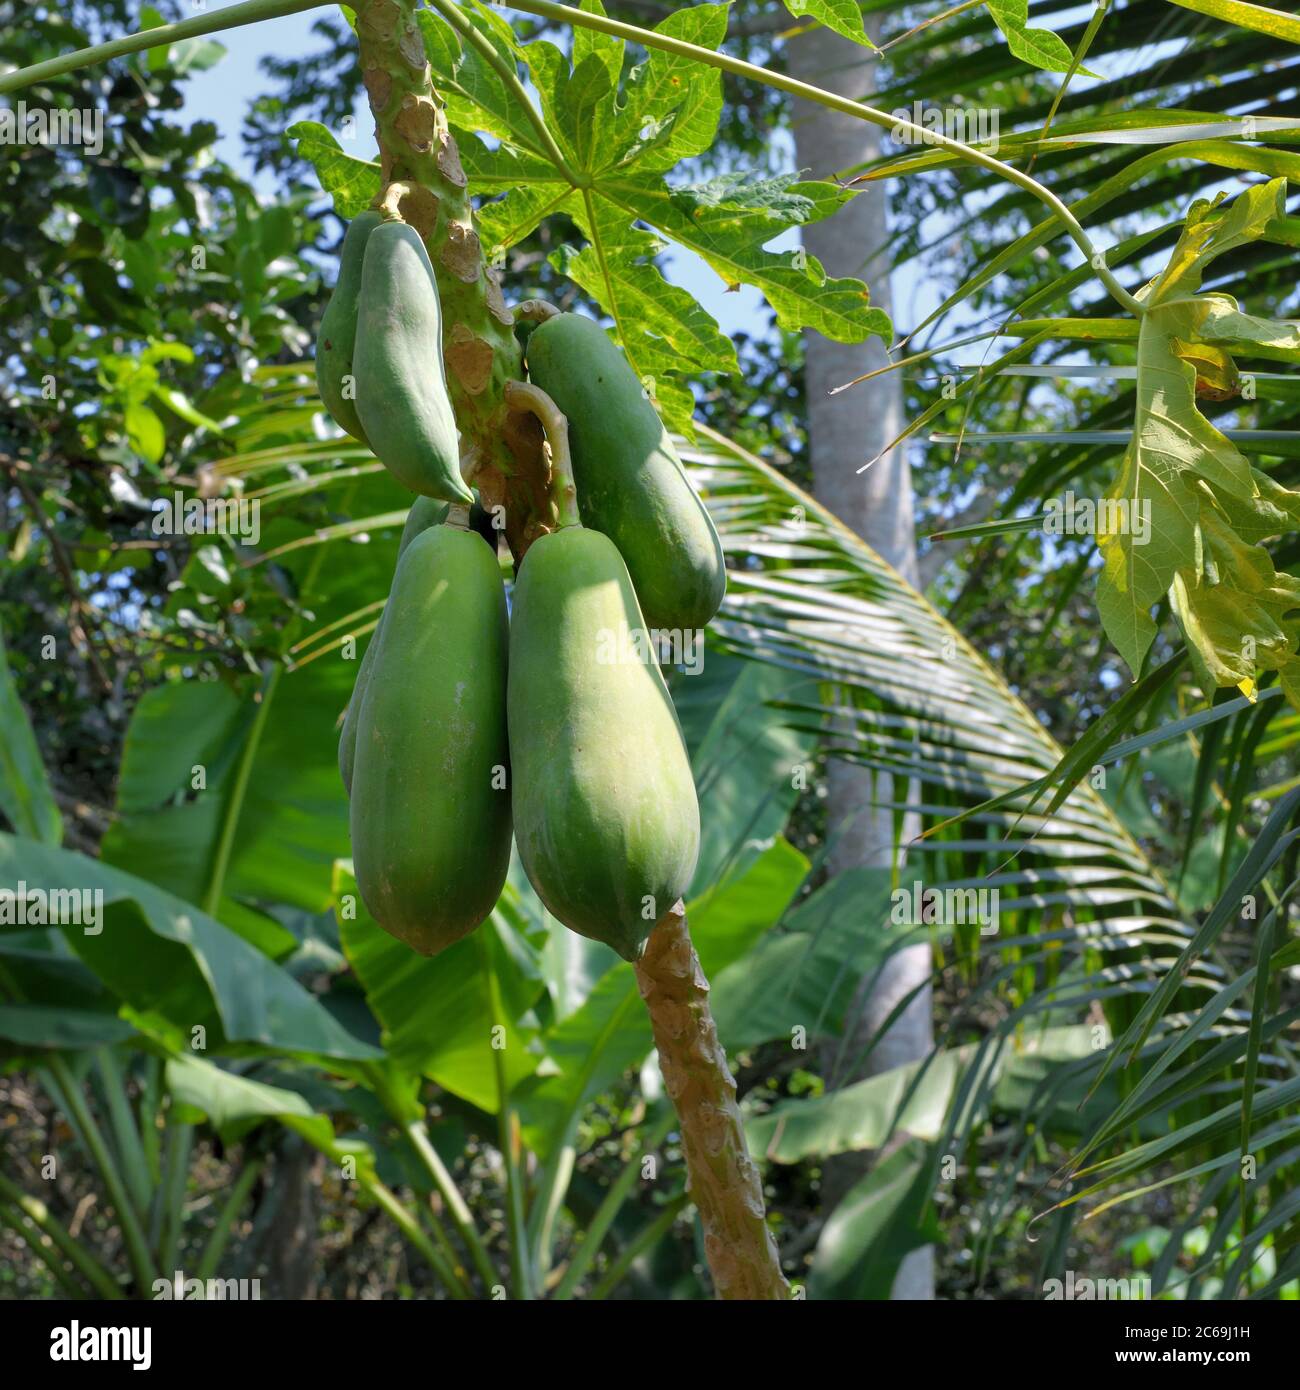 The papaya fruit, papaw, or pawpaw from the plant Carica papaya which is growing here on Unicorn Island (Cù lao Thới Sơn) My Tho, Vietnam. Stock Photo